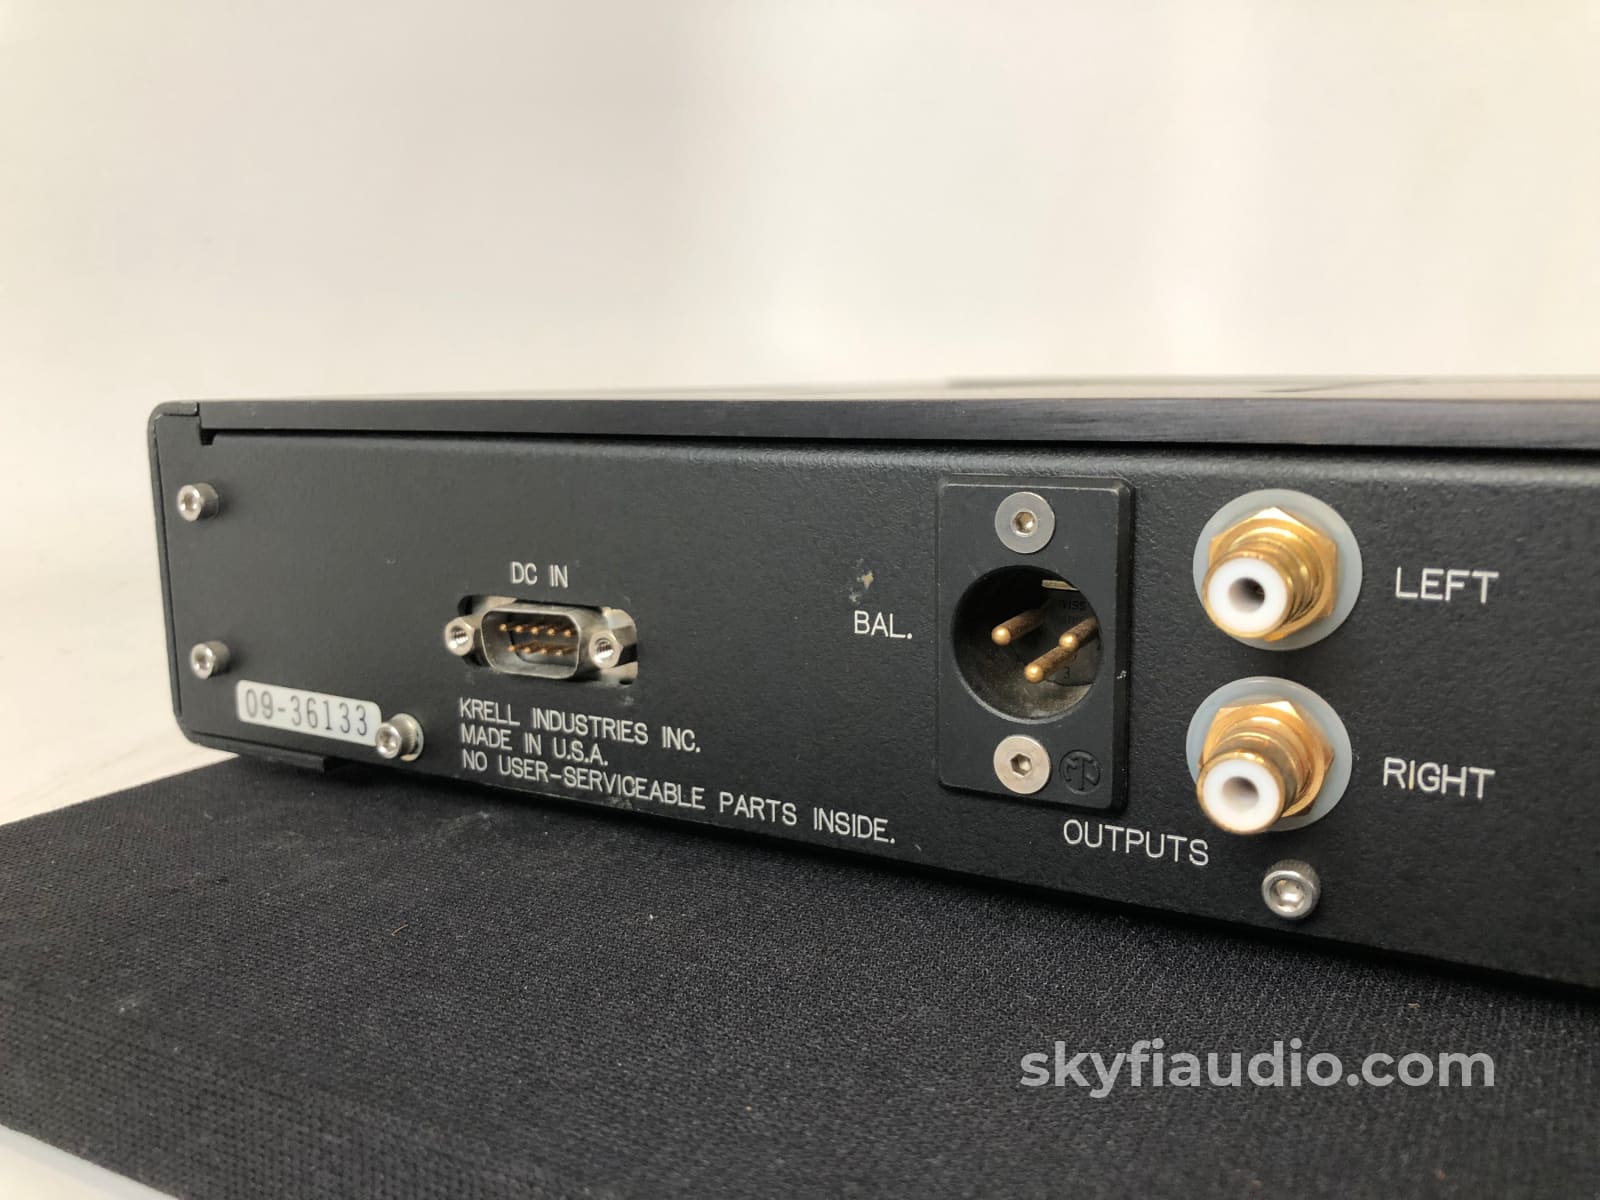 Krell Kbl + Kpa Preamp/Phono Preamp Combo With Power Supply - Stereophile Class A Duo Preamplifier